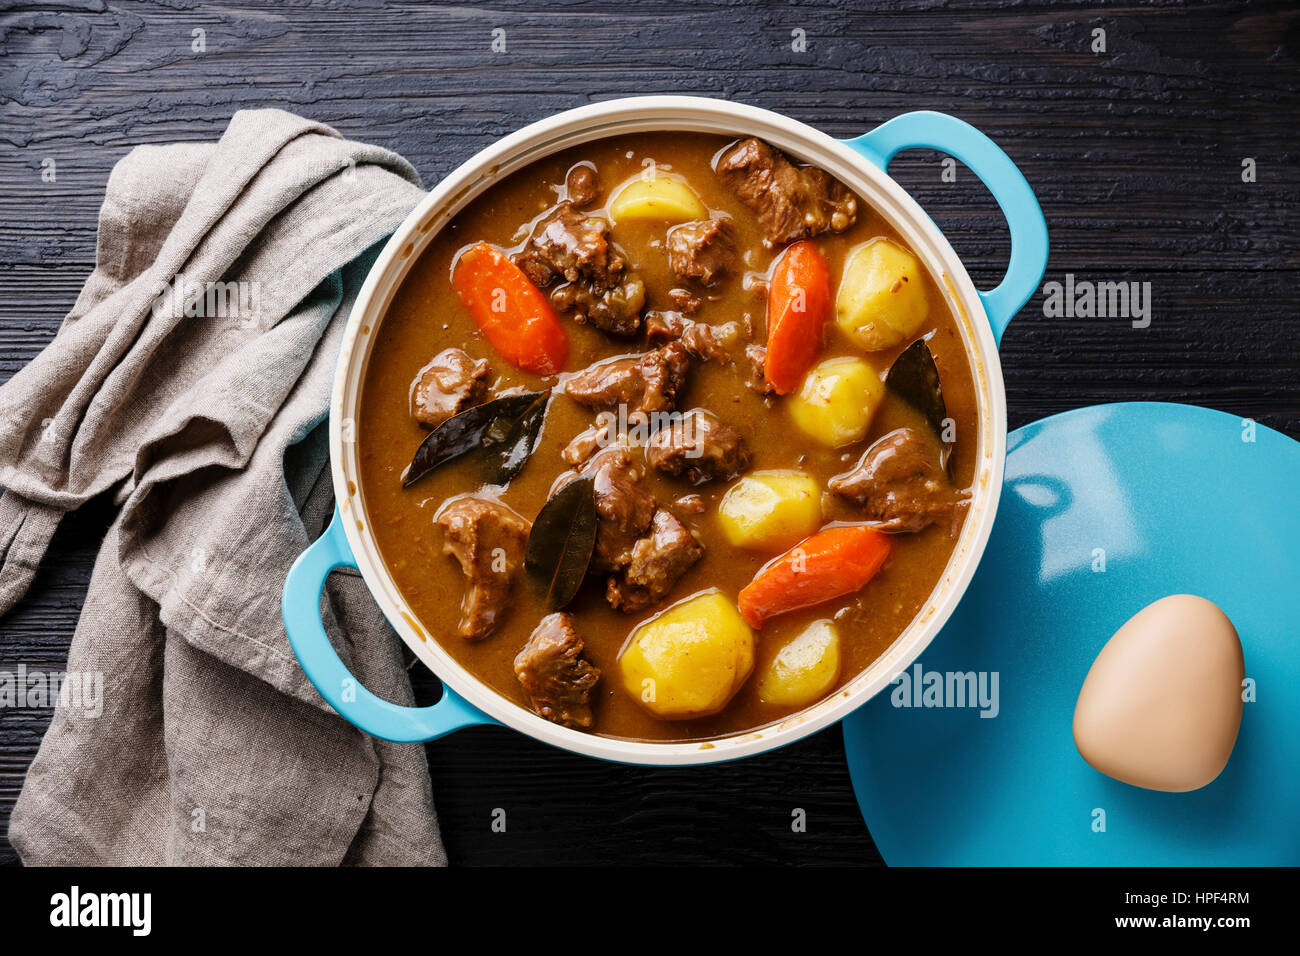 Beef meat stewed with potatoes, carrots and spices in cast iron pan on burned black wooden background Stock Photo